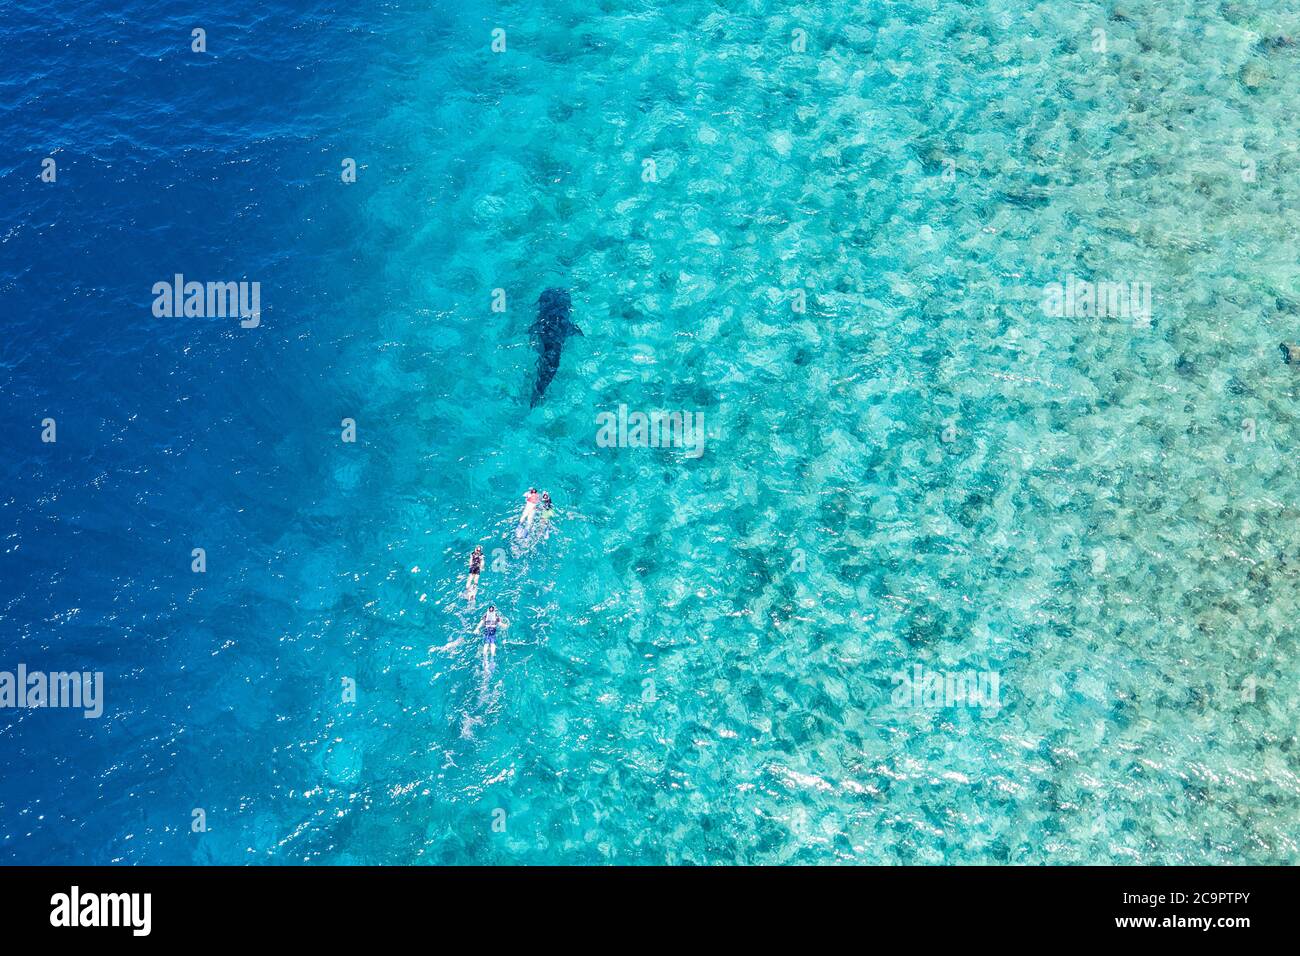 People snorkeling with a whale shark. Amazing aerial view, Indian ocean lagoon coral reef, Maldives islands luxury recreational water sport activity Stock Photo